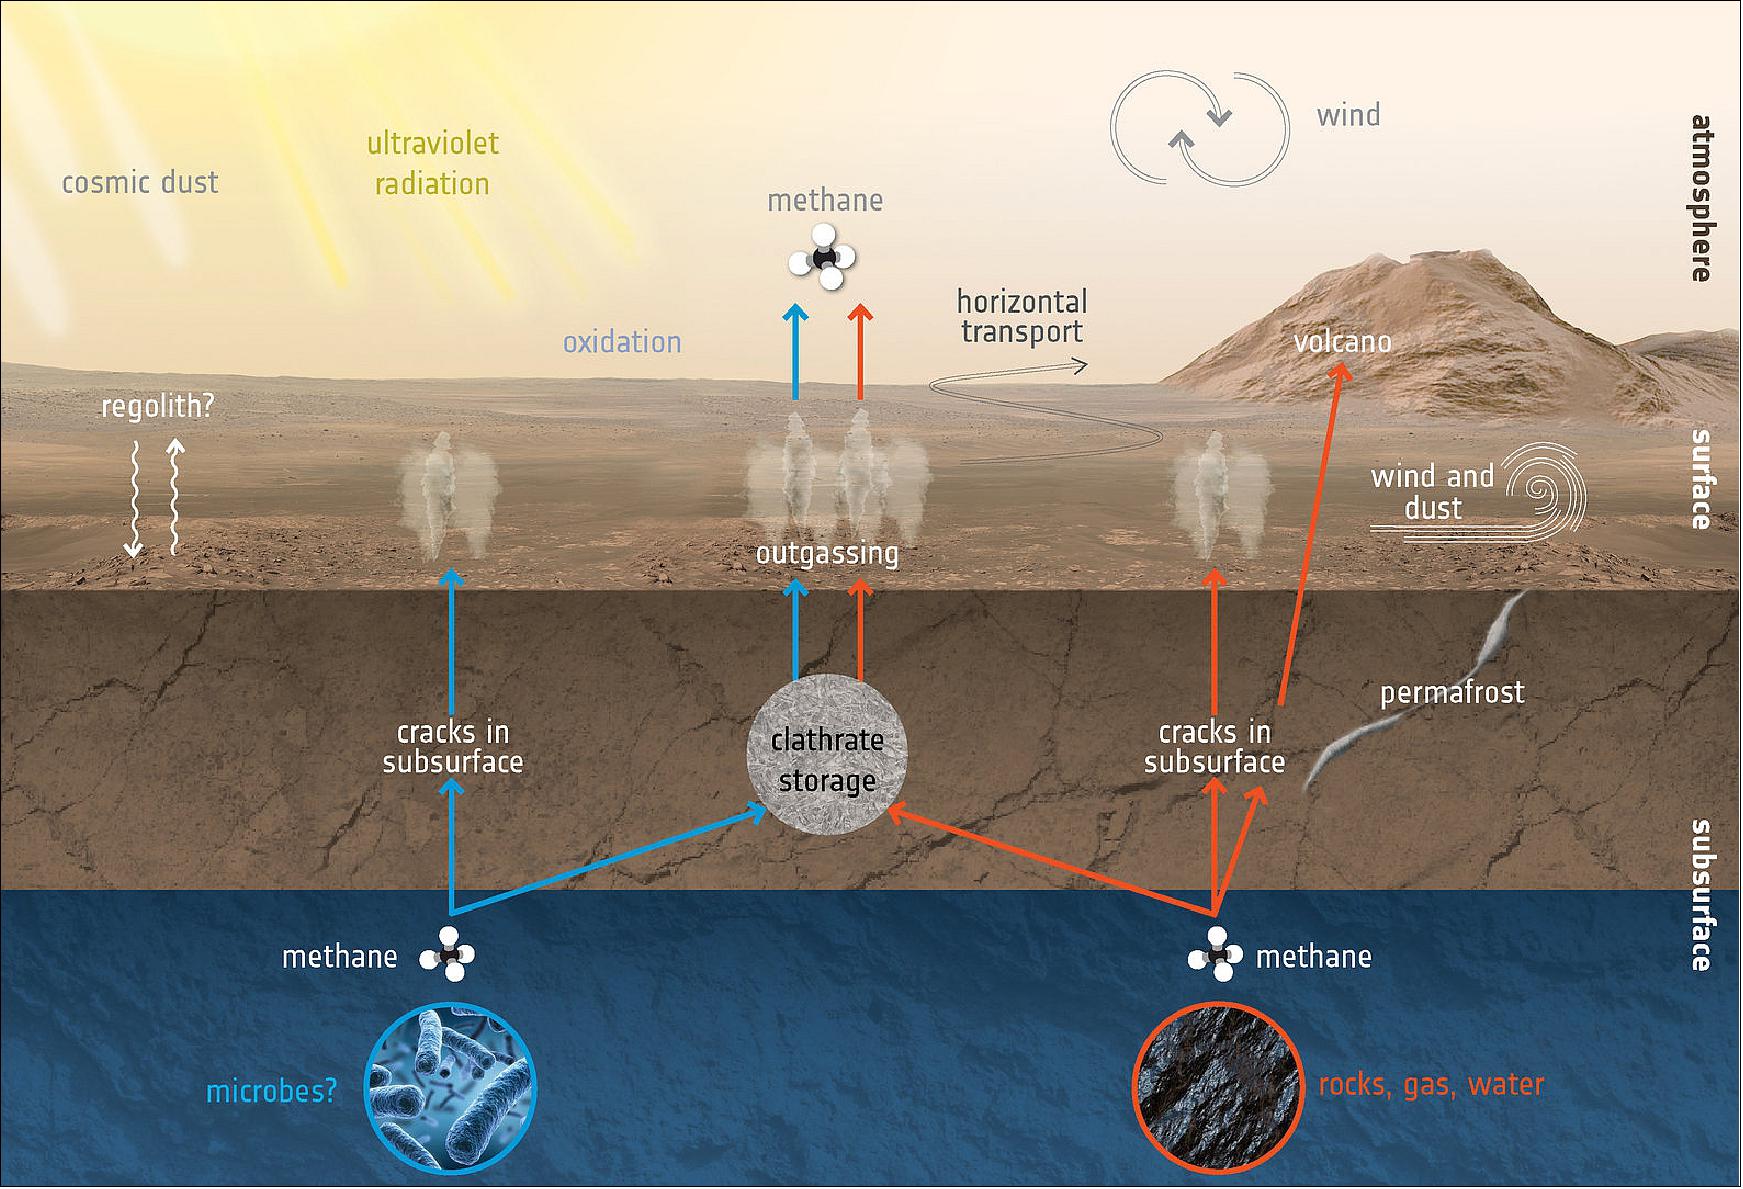 Figure 10: How methane is created and destroyed on Mars is an important question in understanding the various detections and non-detections of methane at Mars, with differences in both time and location. Although making up a very small amount of the overall atmospheric inventory, methane in particular holds key clues to the planet's current state of activity. - This graphic depicts some of the possible ways methane might be added or removed from the atmosphere. One exciting possibility is that methane is generated by microbes. If buried underground, this gas could be stored in lattice-structured ice formations known as clathrates, and released to the atmosphere at a much later time. - Methane can also be generated by reactions between carbon dioxide and hydrogen (which, in turn, can be produced by reaction of water and olivine-rich rocks), by deep magmatic degassing or by thermal degradation of ancient organic matter. Again, this could be stored underground and outgassed through cracks in the surface. Methane can also become trapped in pockets of shallow ice, such as seasonal permafrost. -Ultraviolet radiation can both generate methane – through reactions with other molecules or organic material already on the surface, such as comet dust falling onto Mars – and break it down. Ultraviolet reactions in the upper atmosphere (above 60 km) and oxidation reactions in the lower atmosphere (below 60 km) acts to transform methane into carbon dioxide, hydrogen and water vapor, and leads to a lifetime of the molecule of about 300 years. - Methane can also be quickly distributed around the planet by atmospheric circulation, diluting its signal and making it challenging to identify individual sources. Because of the lifetime of the molecule when considering atmospheric processes, any detections today imply it has been released relatively recently. - Continued exploration at Mars – from orbit and the surface alike – along with laboratory experiments and simulations, will help scientists to better understand the different processes involved in generating and destroying methane (image credit: ESA)